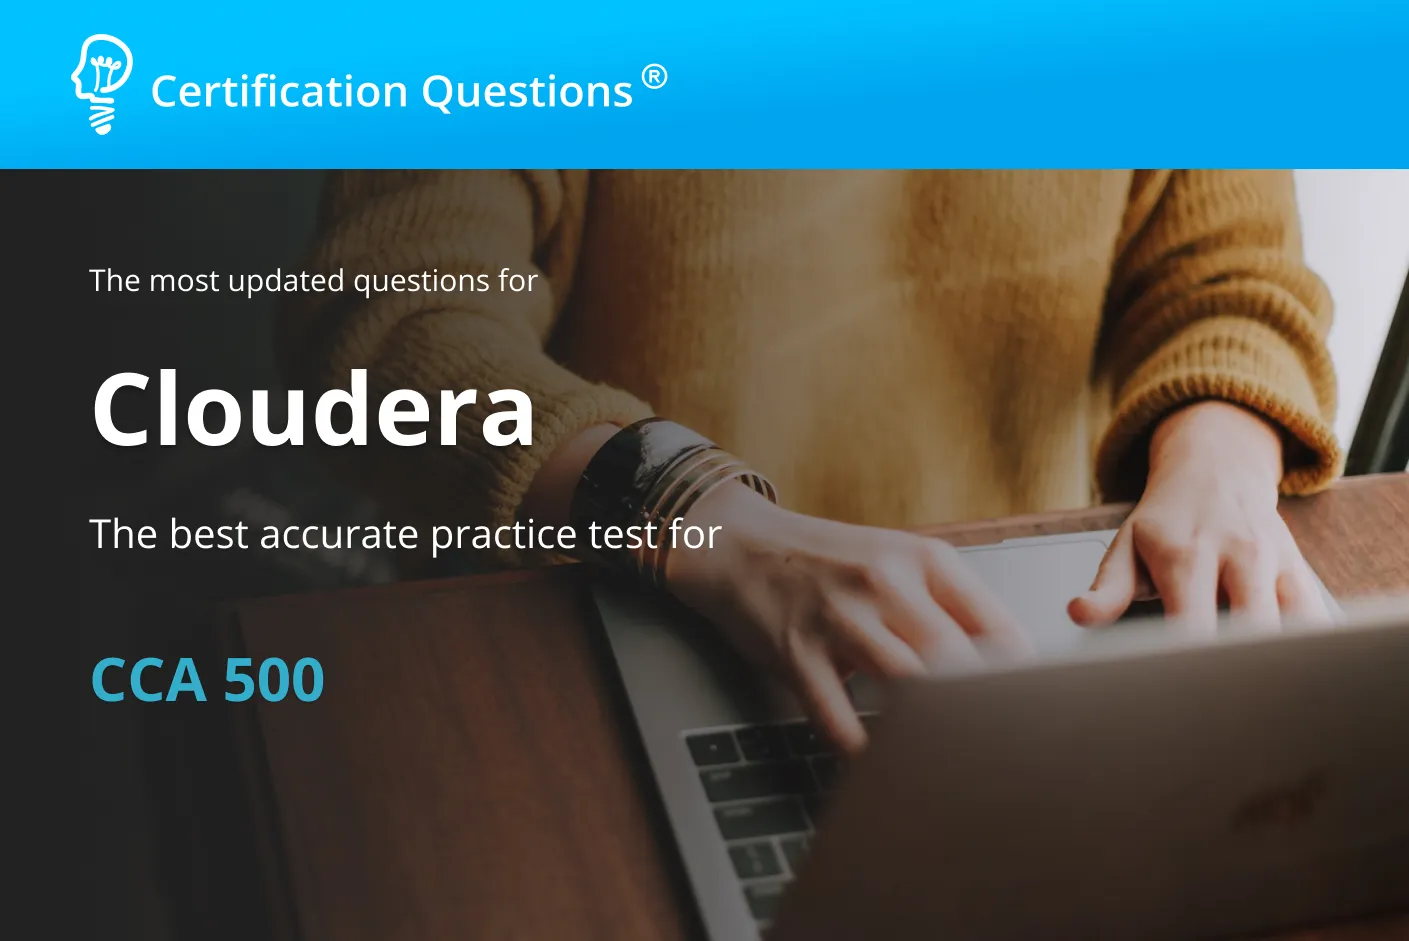 This image is related to the study guide of the cloudera ccah practice exam.